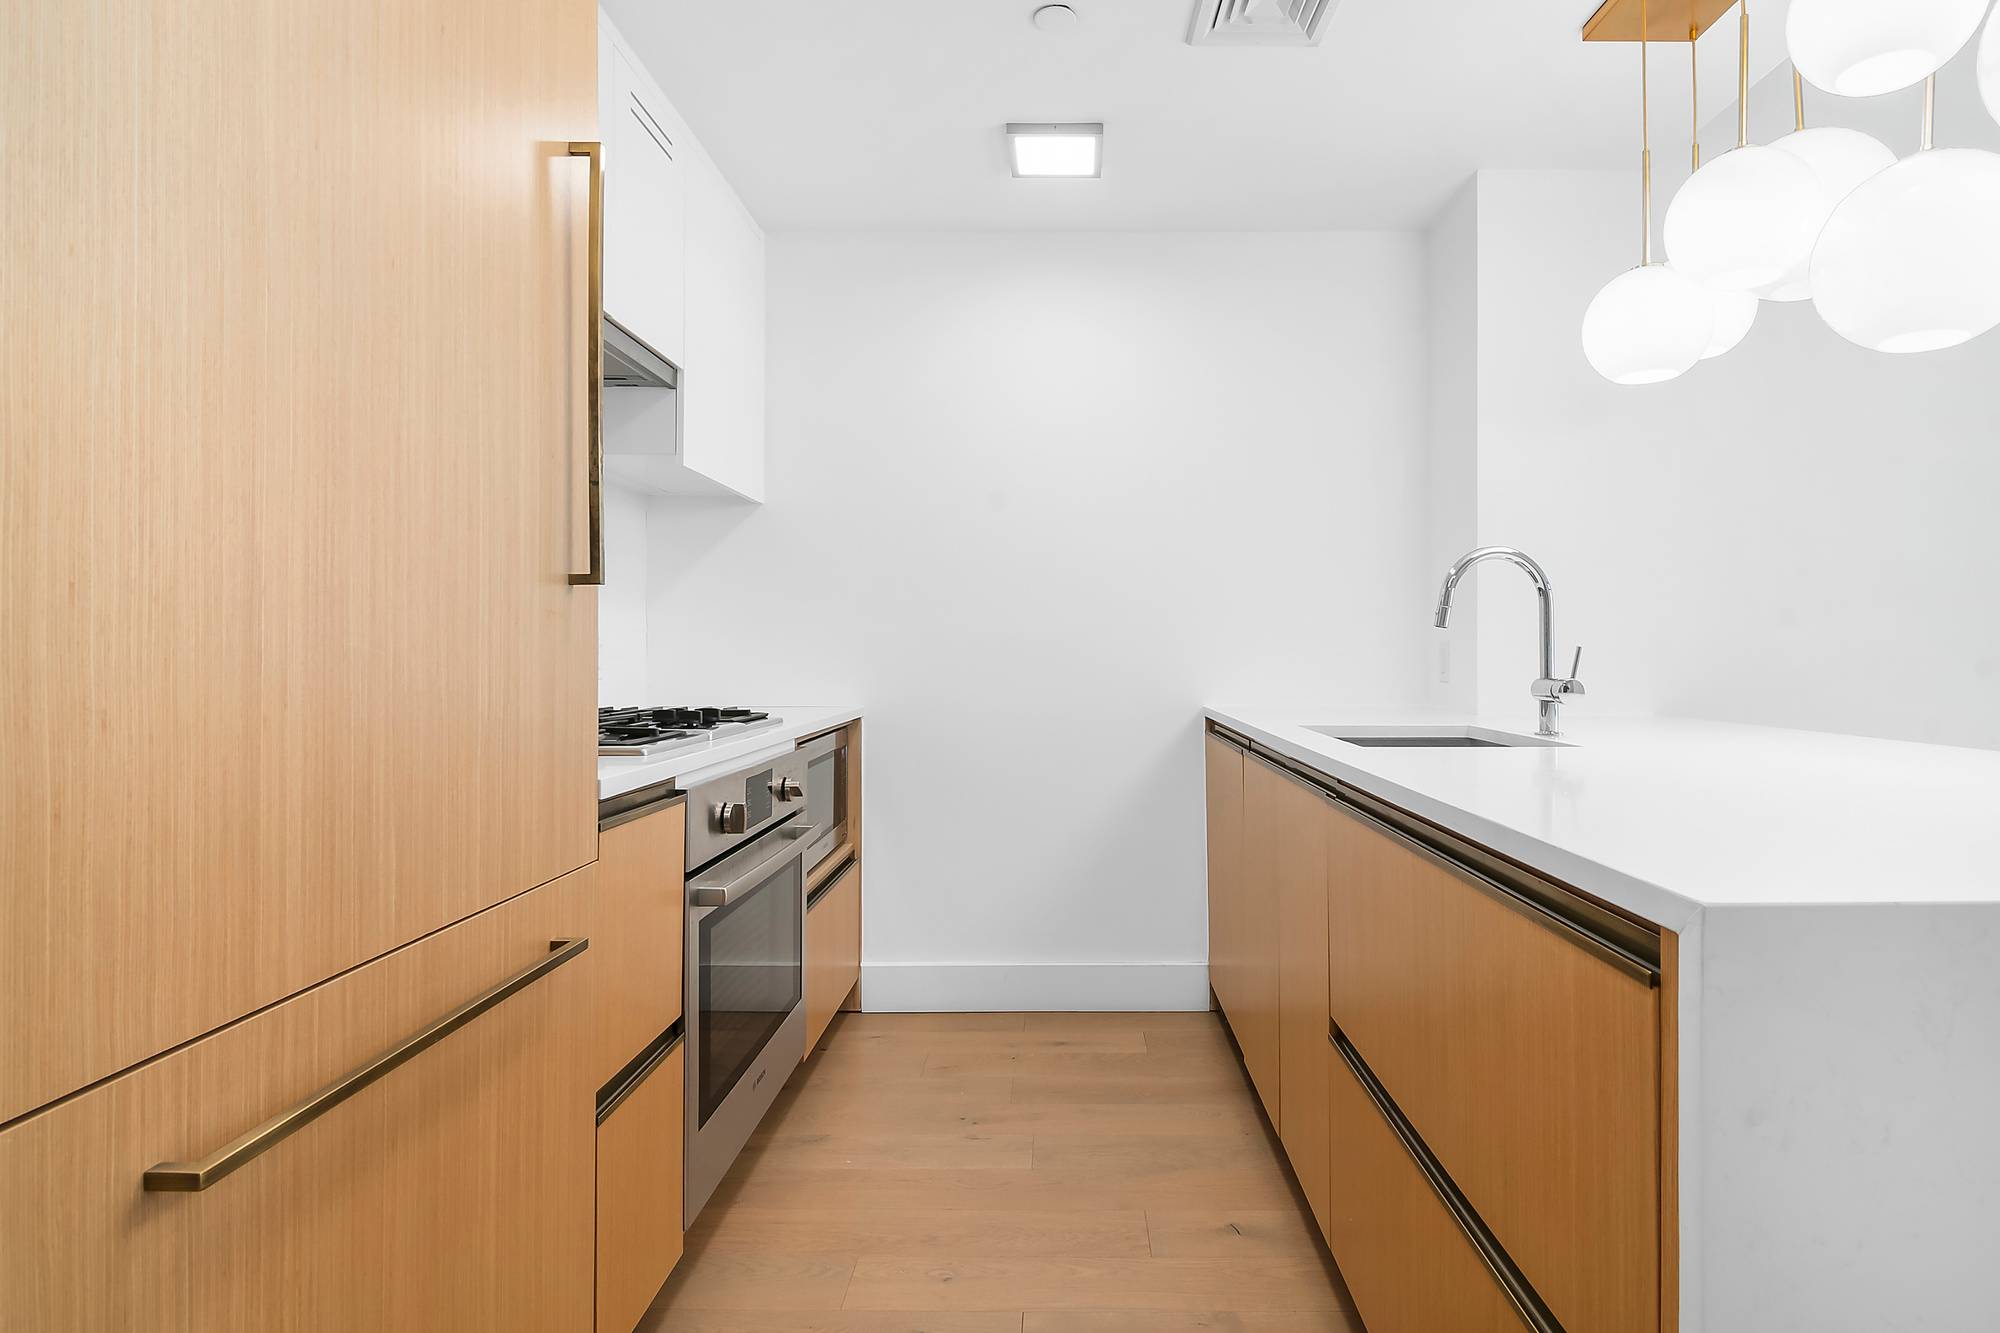 Three years new ! This wonderful almost new home is a gracious two bedroom, two bathroom condominium apartment nestled in the heart of Boerum Hill.